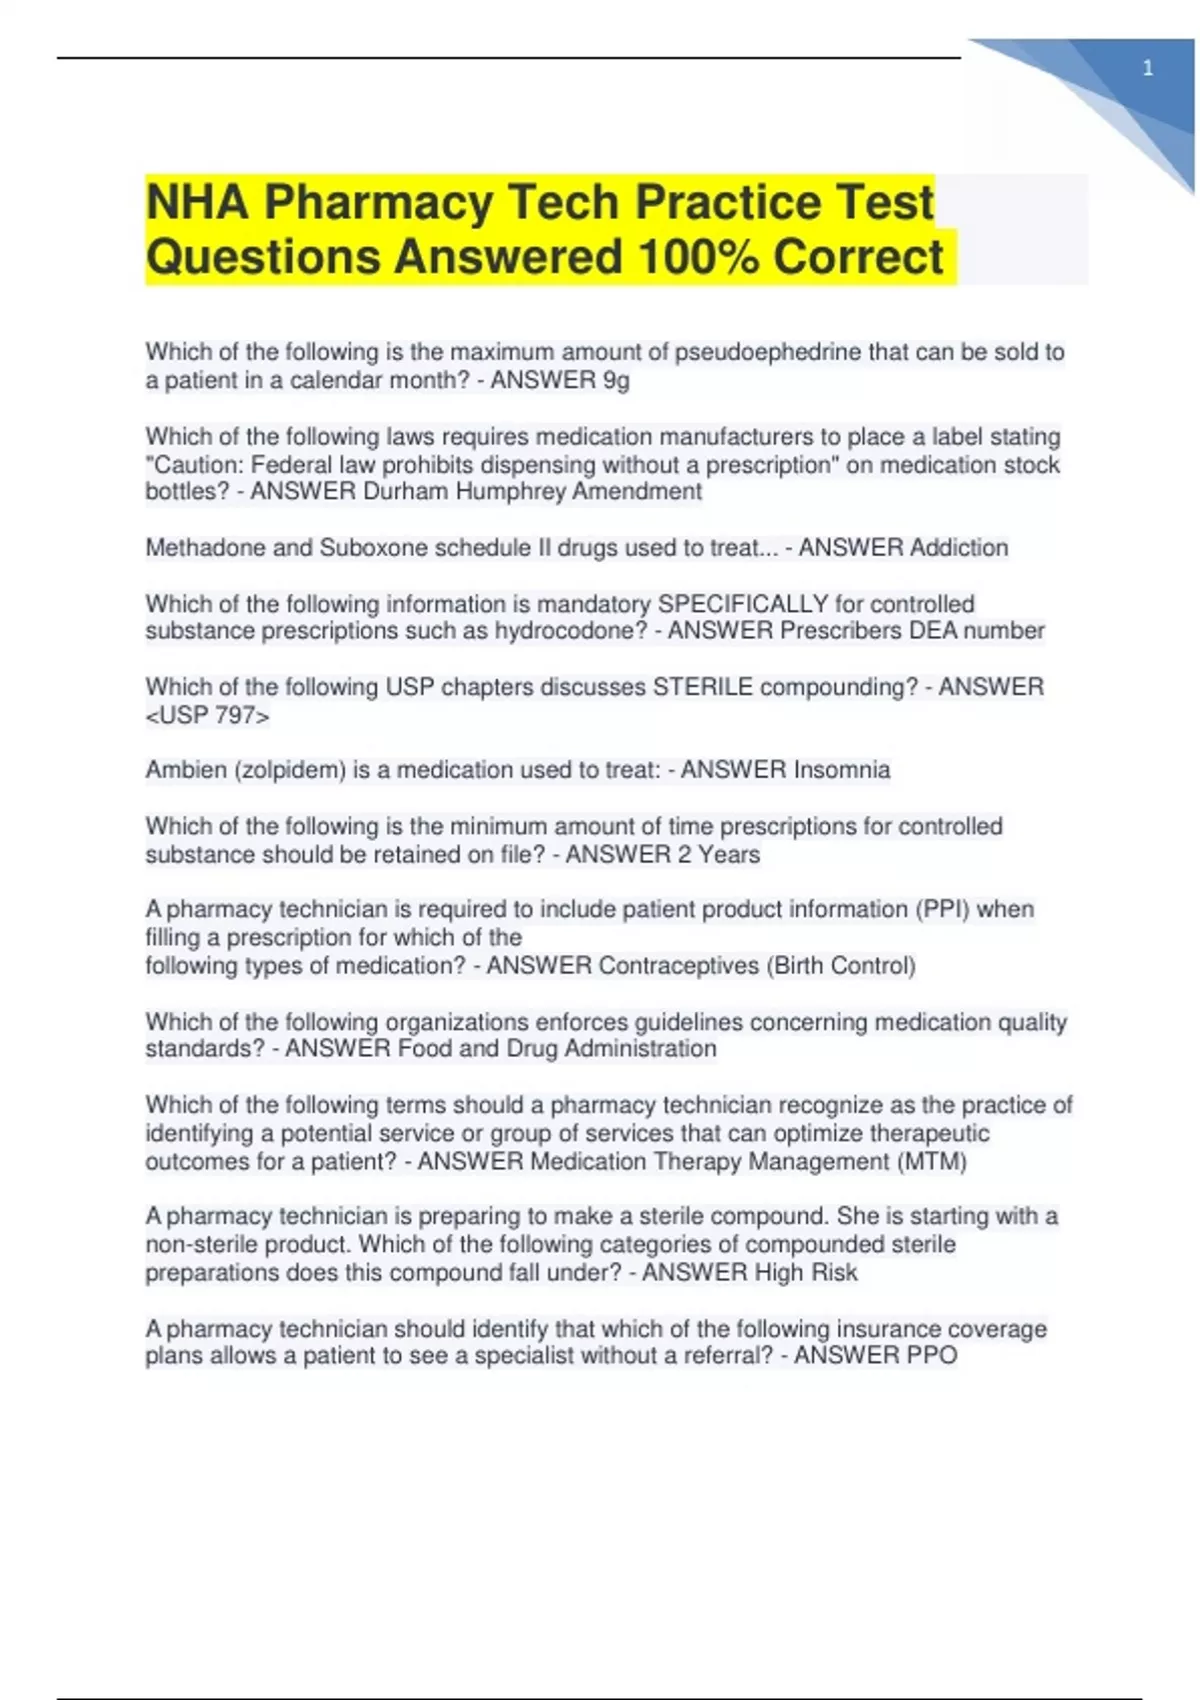 NHA Pharmacy Tech Practice Test Questions Answered 100 Correct latest